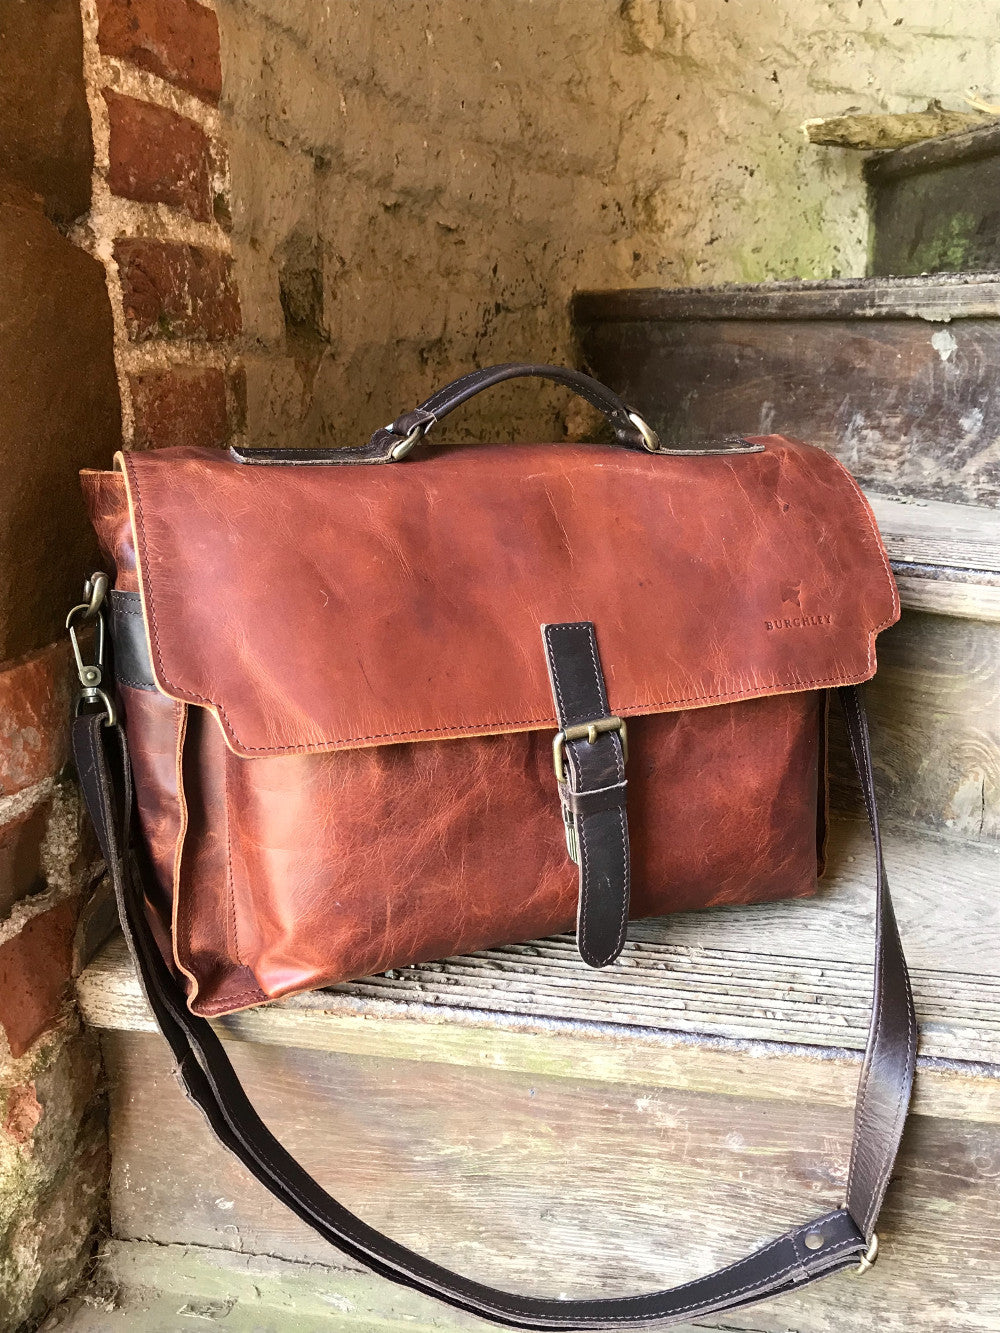 The Dorrington Briefcase. A classic 30's styled leather briefcase by Burghley Bags. A handmade leather vintage work bag, with enough space for 15" laptops. Comes with an adjustable and detachable shoulder strap. Shown in striking dual brown.